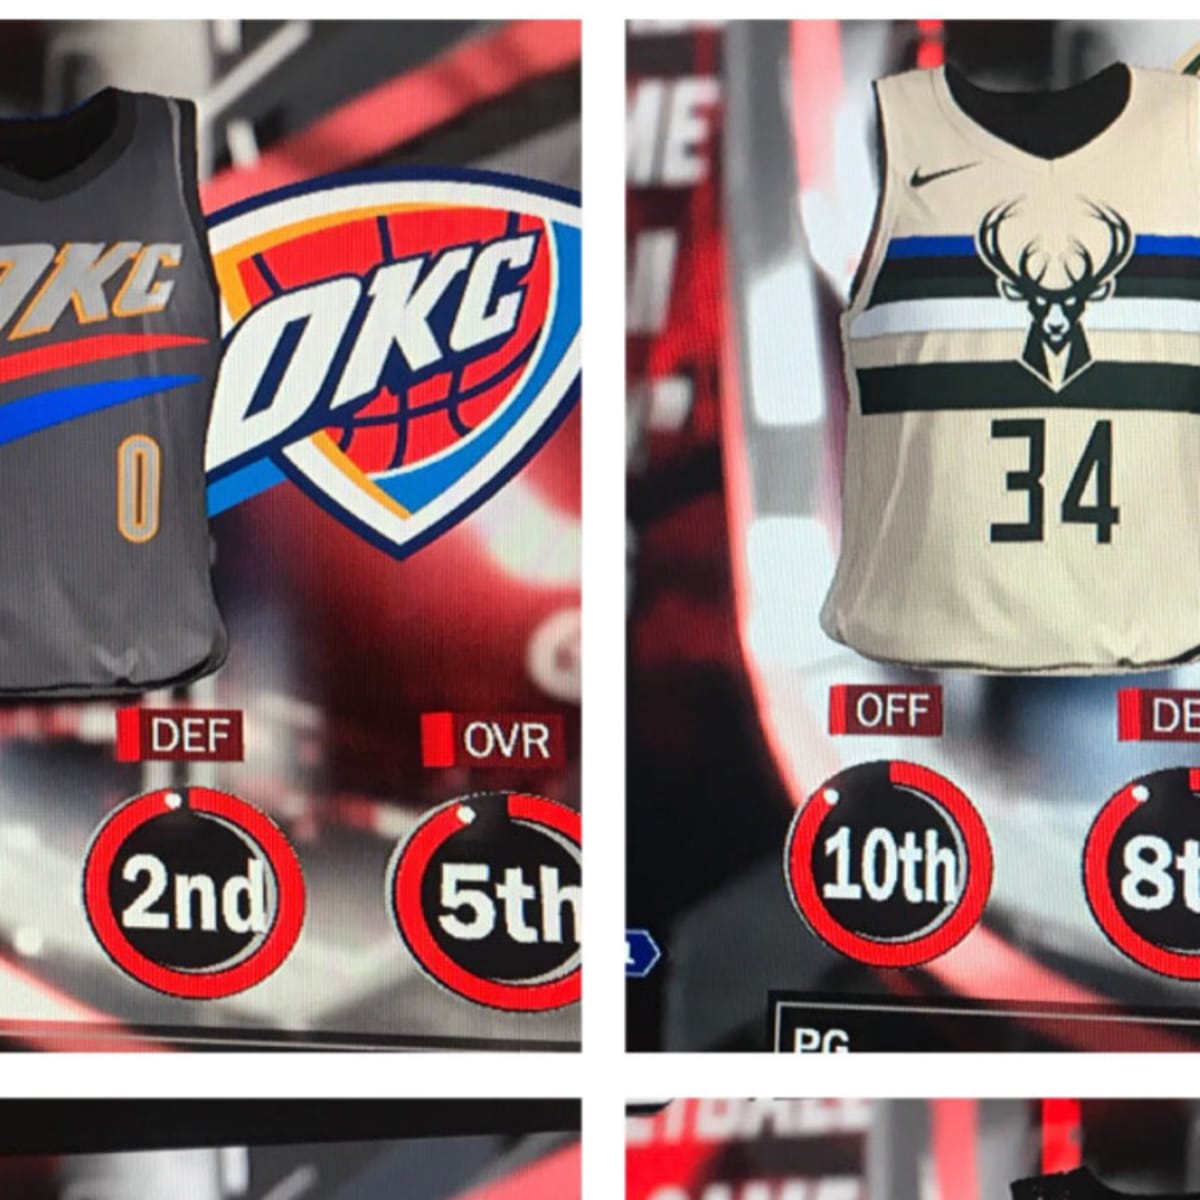 Leaked: Here's the 2021 NBA City jerseys for the Lakers, Suns, and